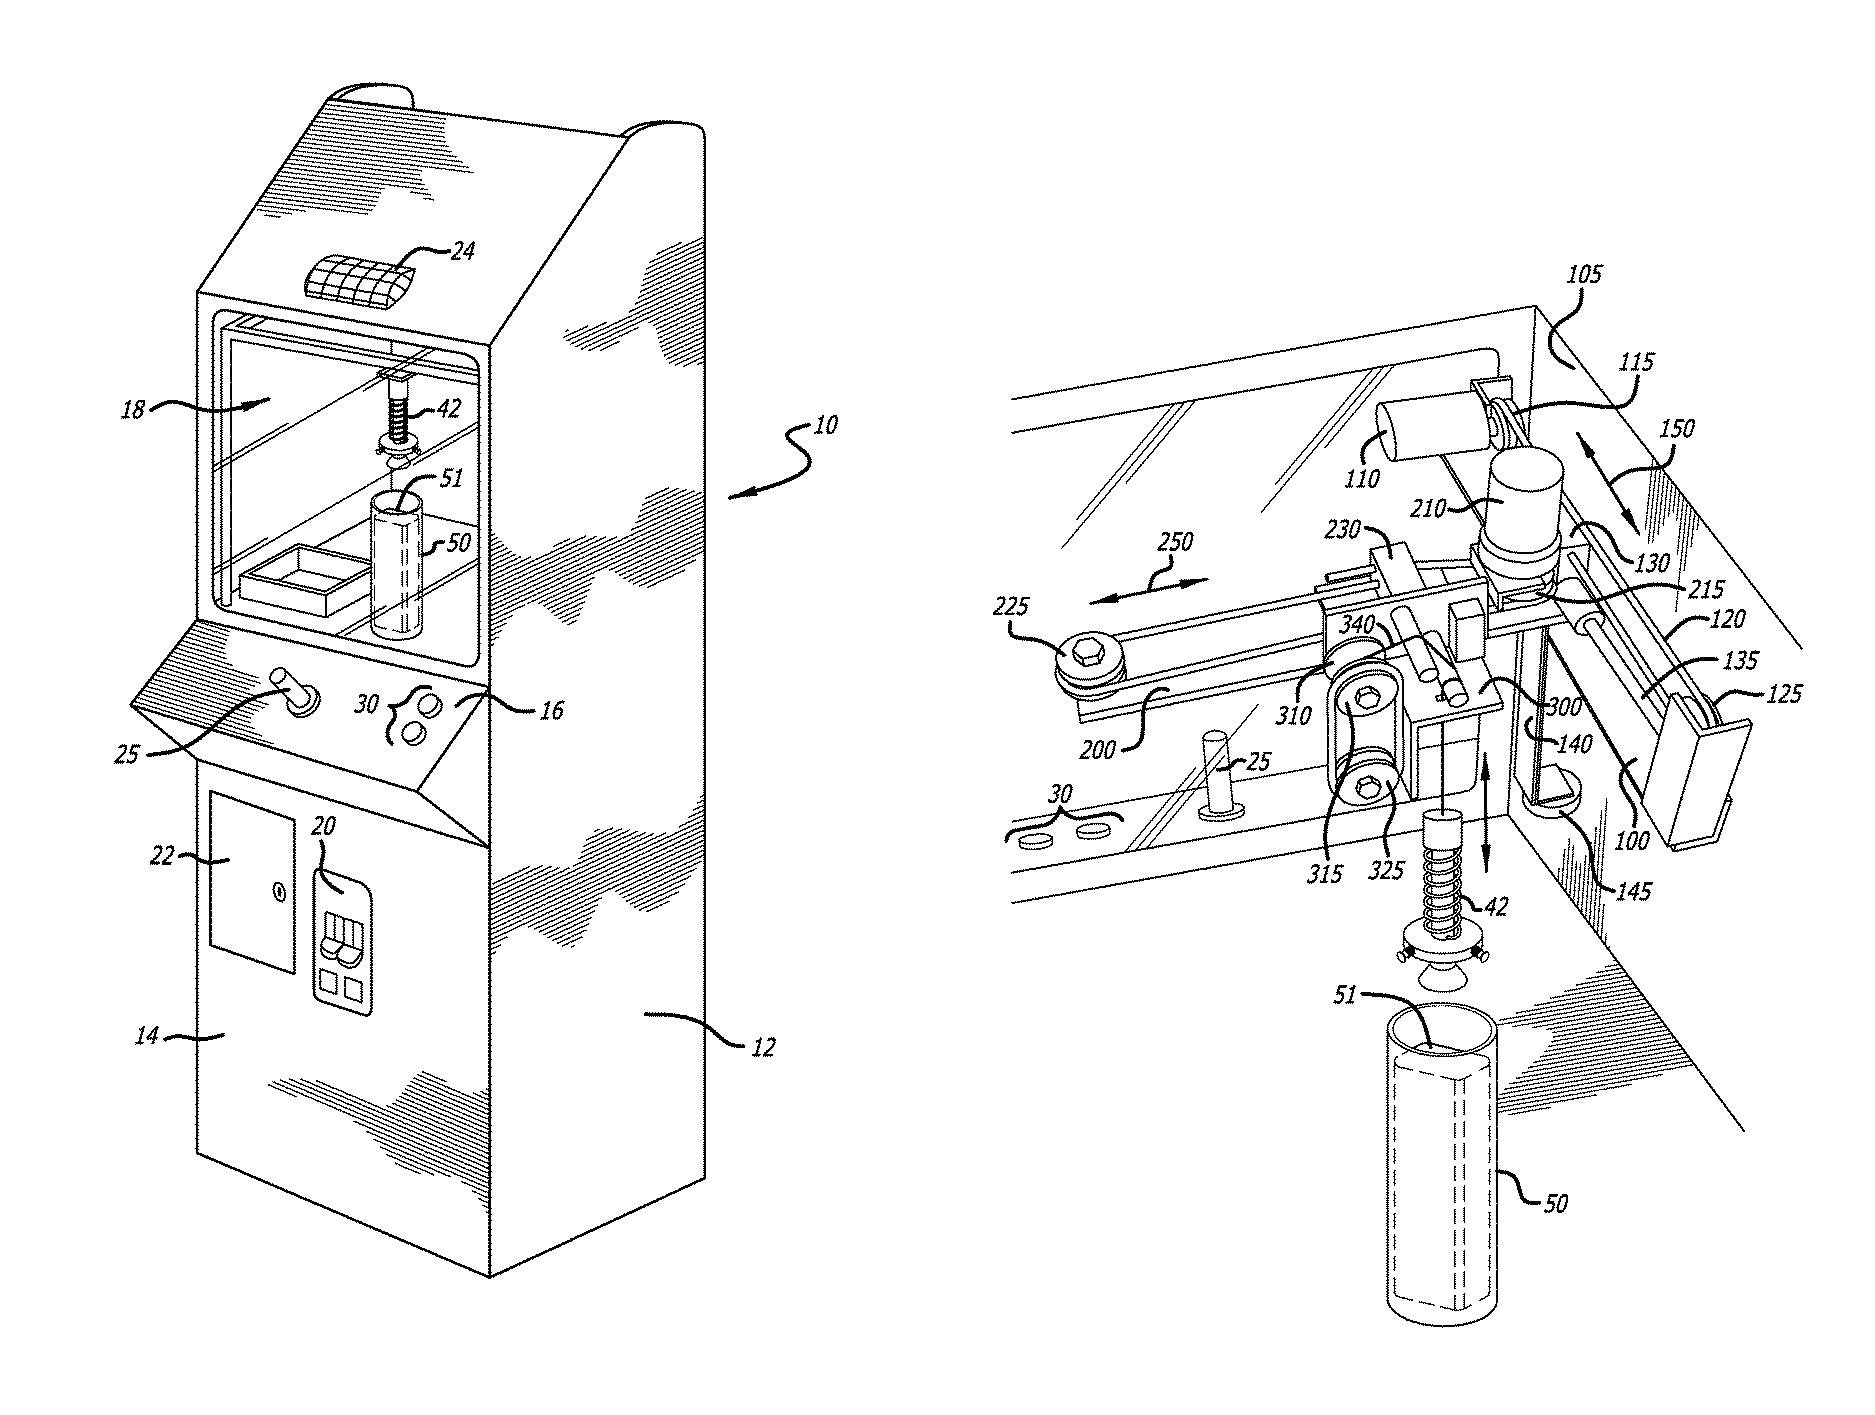 Crane game with modified pulley system